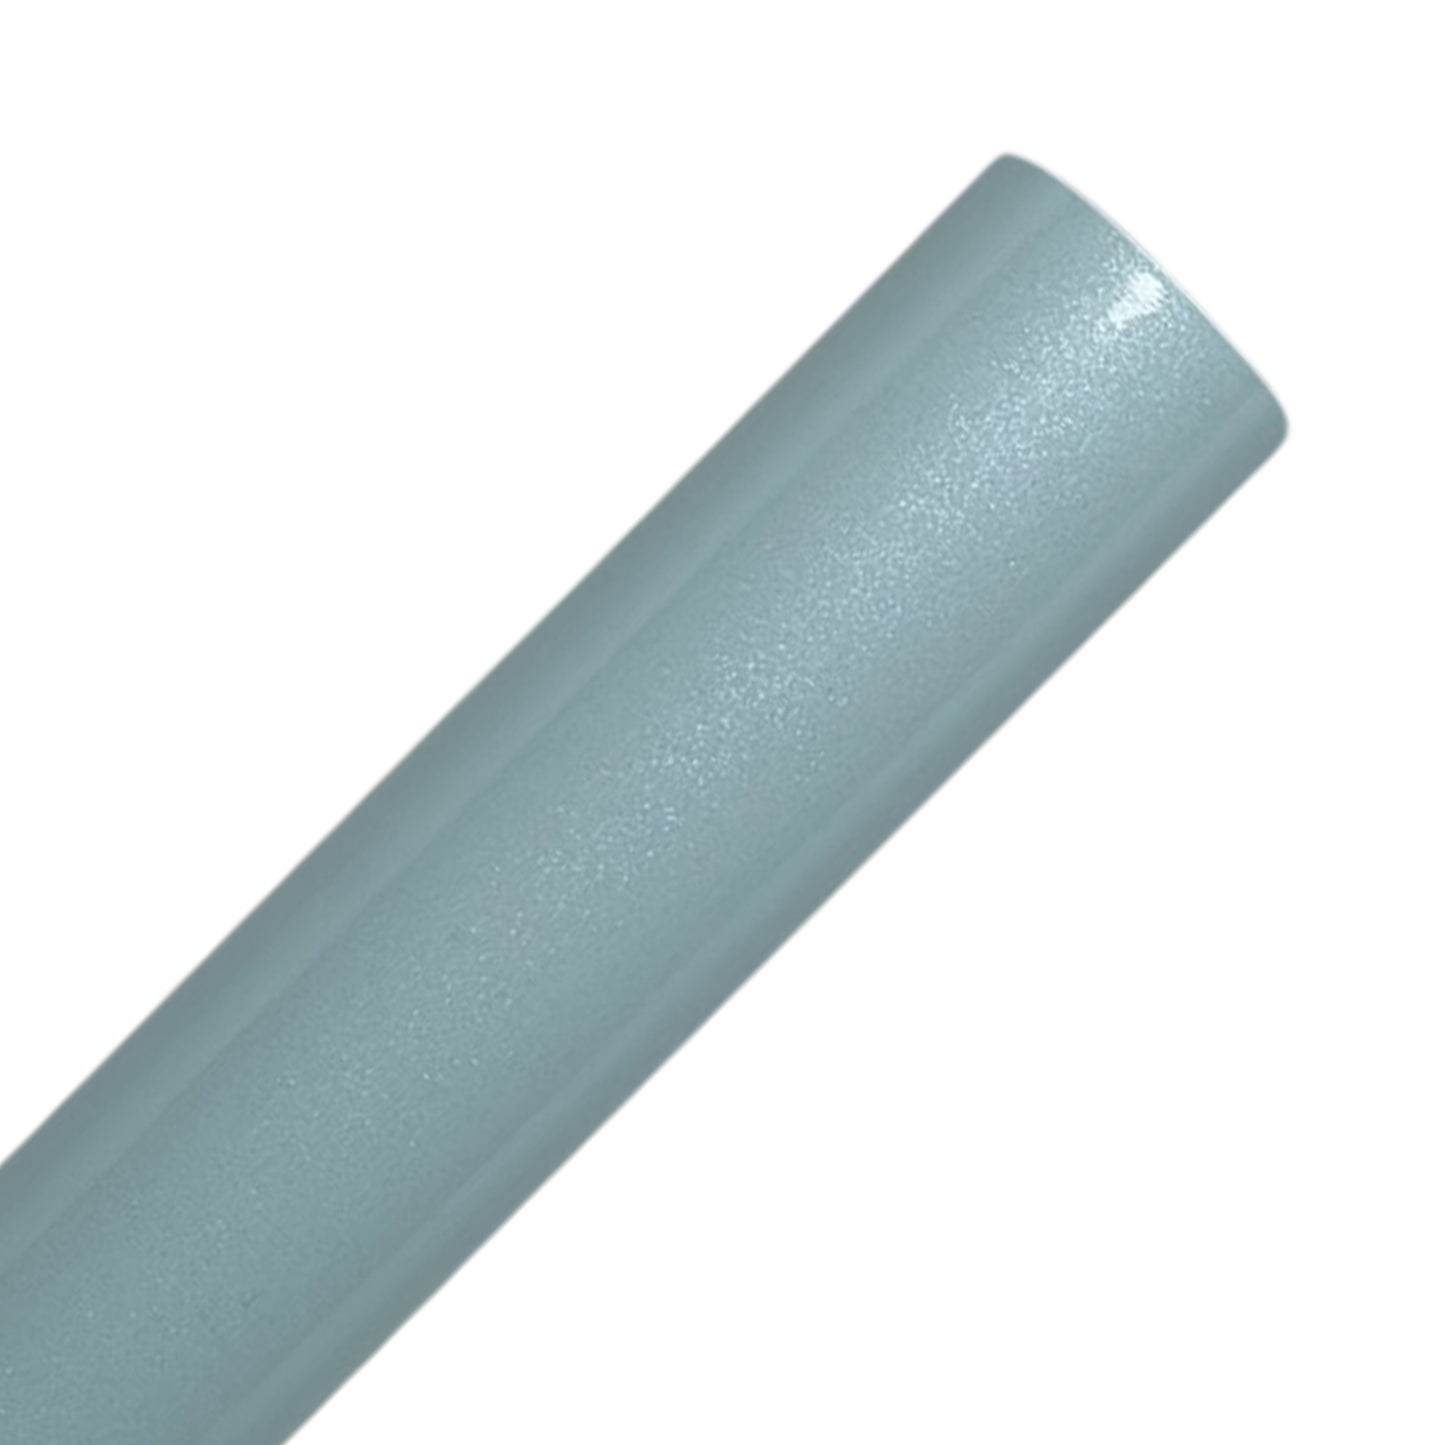 Light Blue Shimmer Glitter Adhesive Vinyl Sheets By Craftables